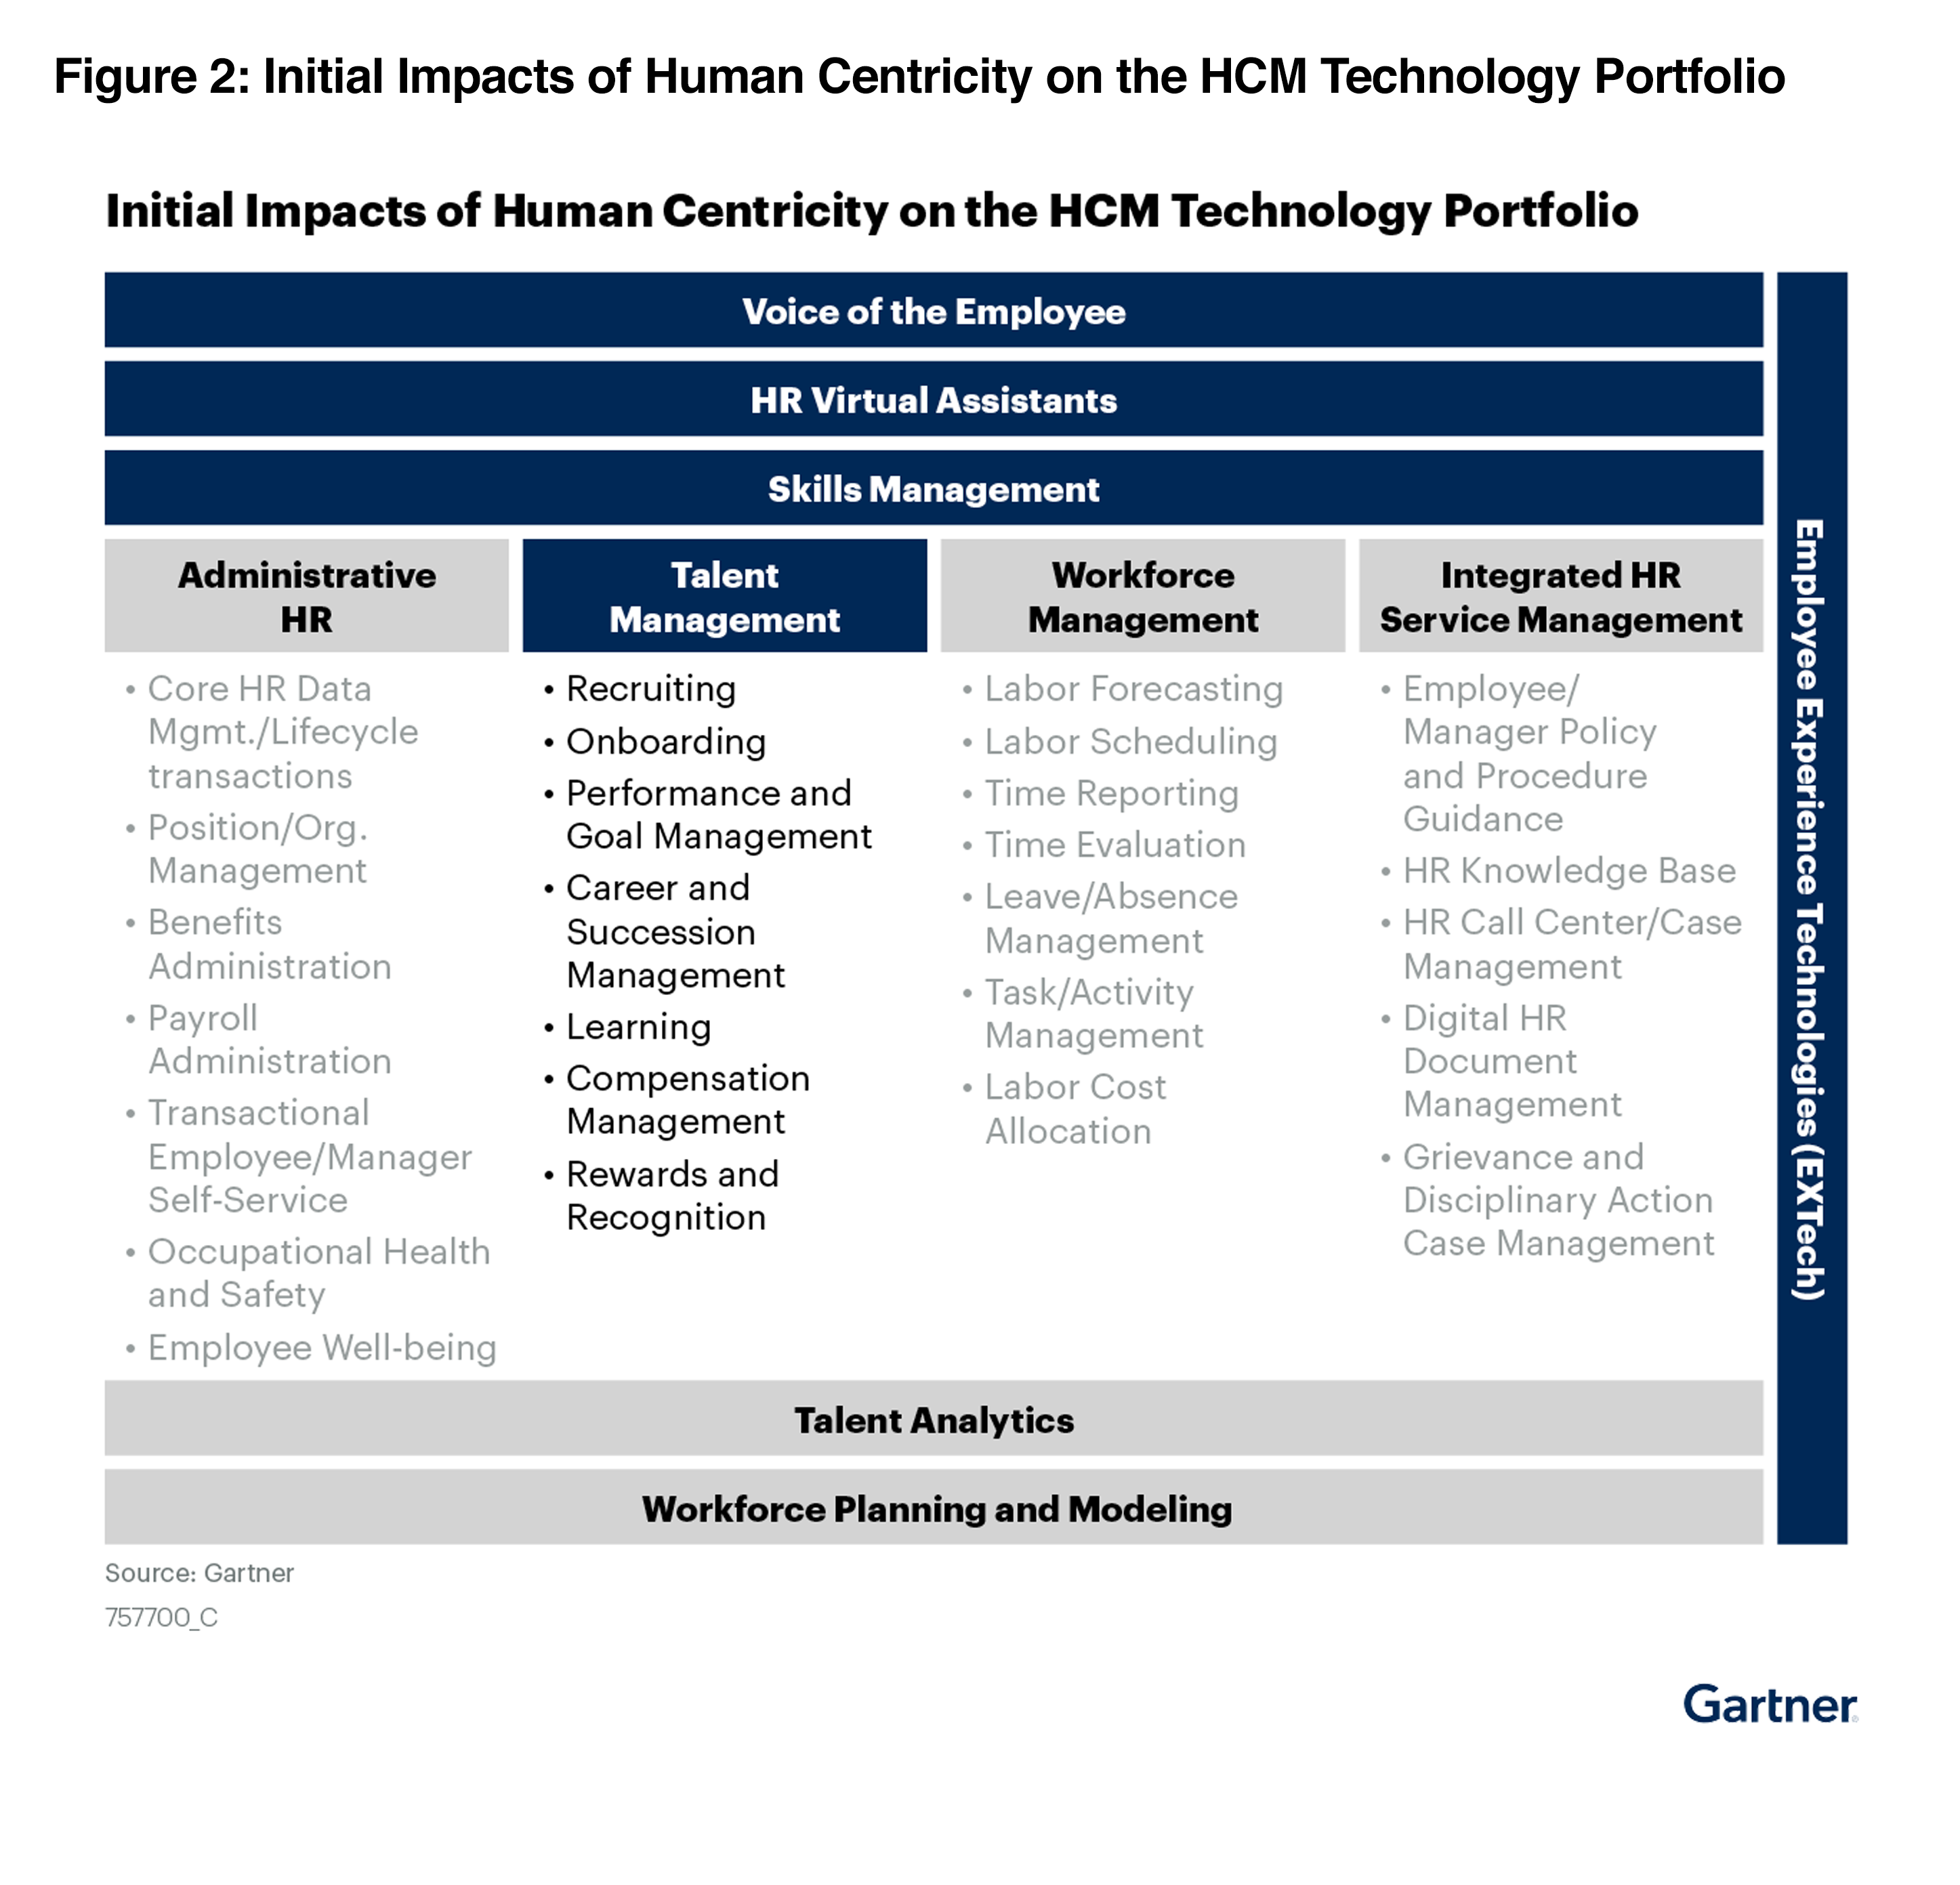 Predicts 2022: HCM Technologies Enable Employee Experience to Support the “New Normal” of Work